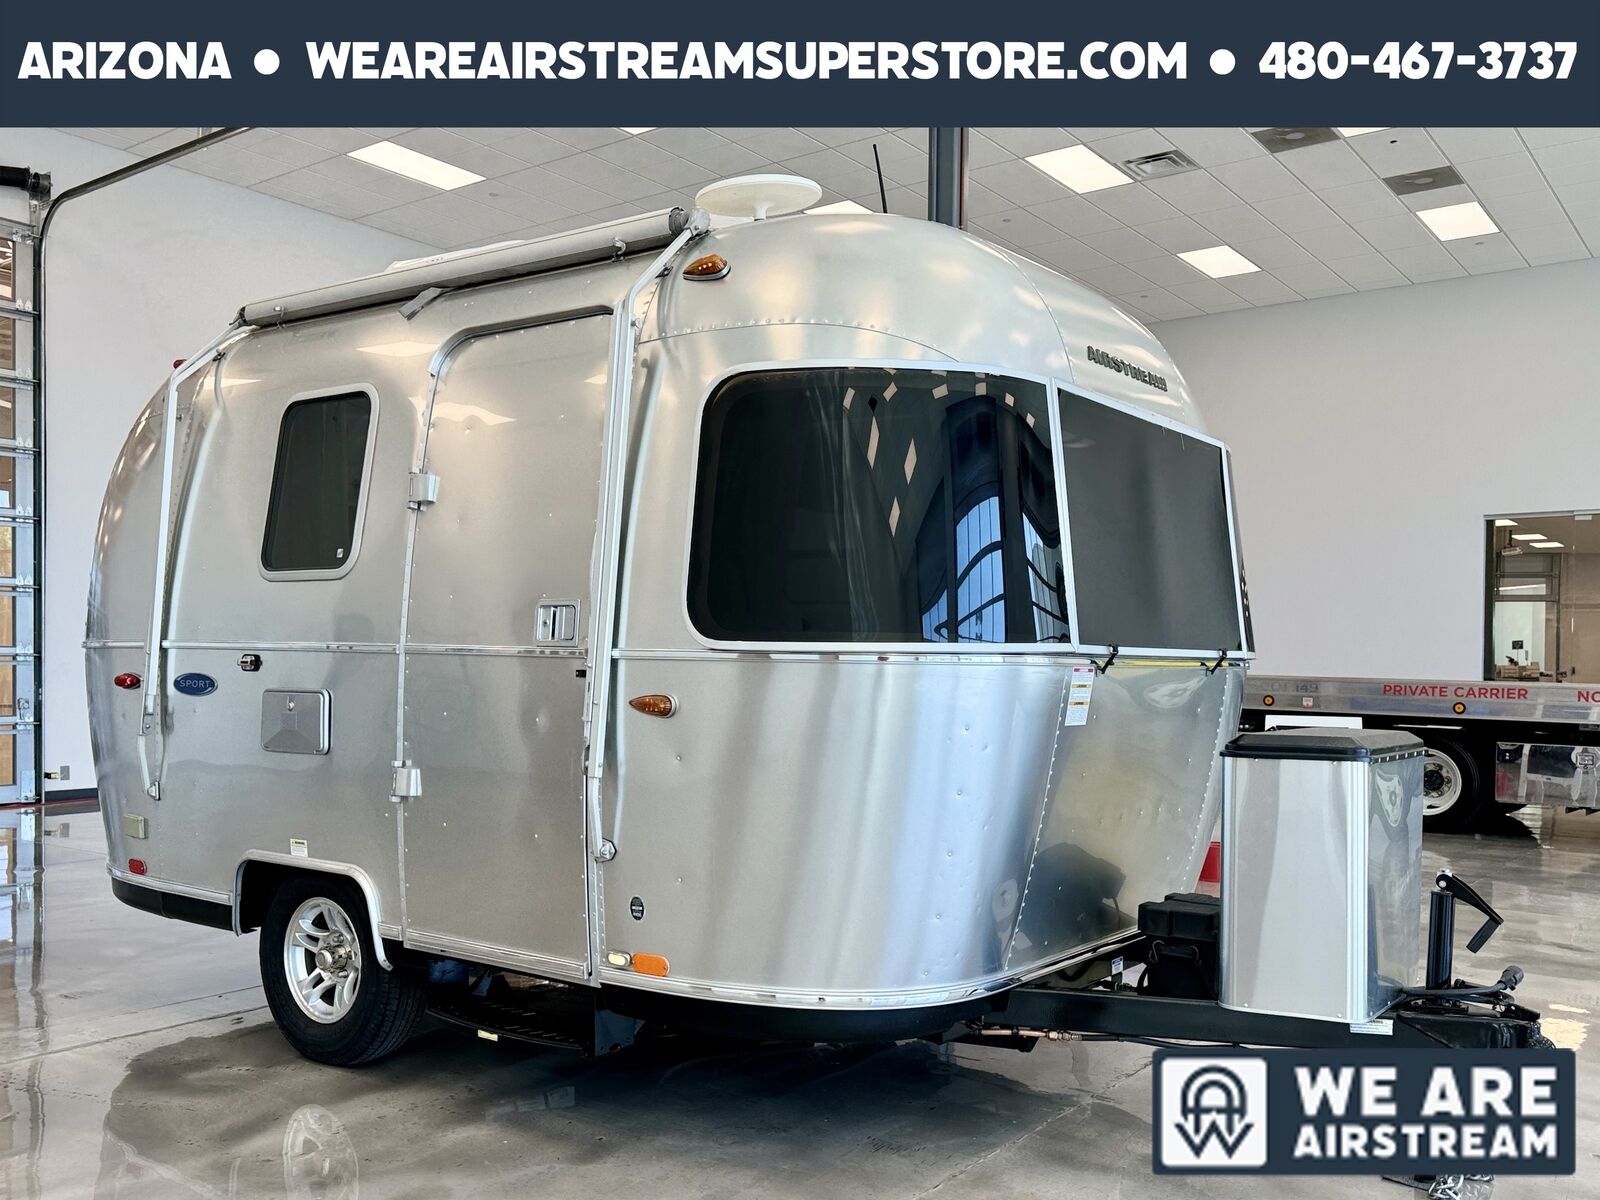 2016 AIRSTREAM SPORT 16RB, Silver with 0 Miles available now!